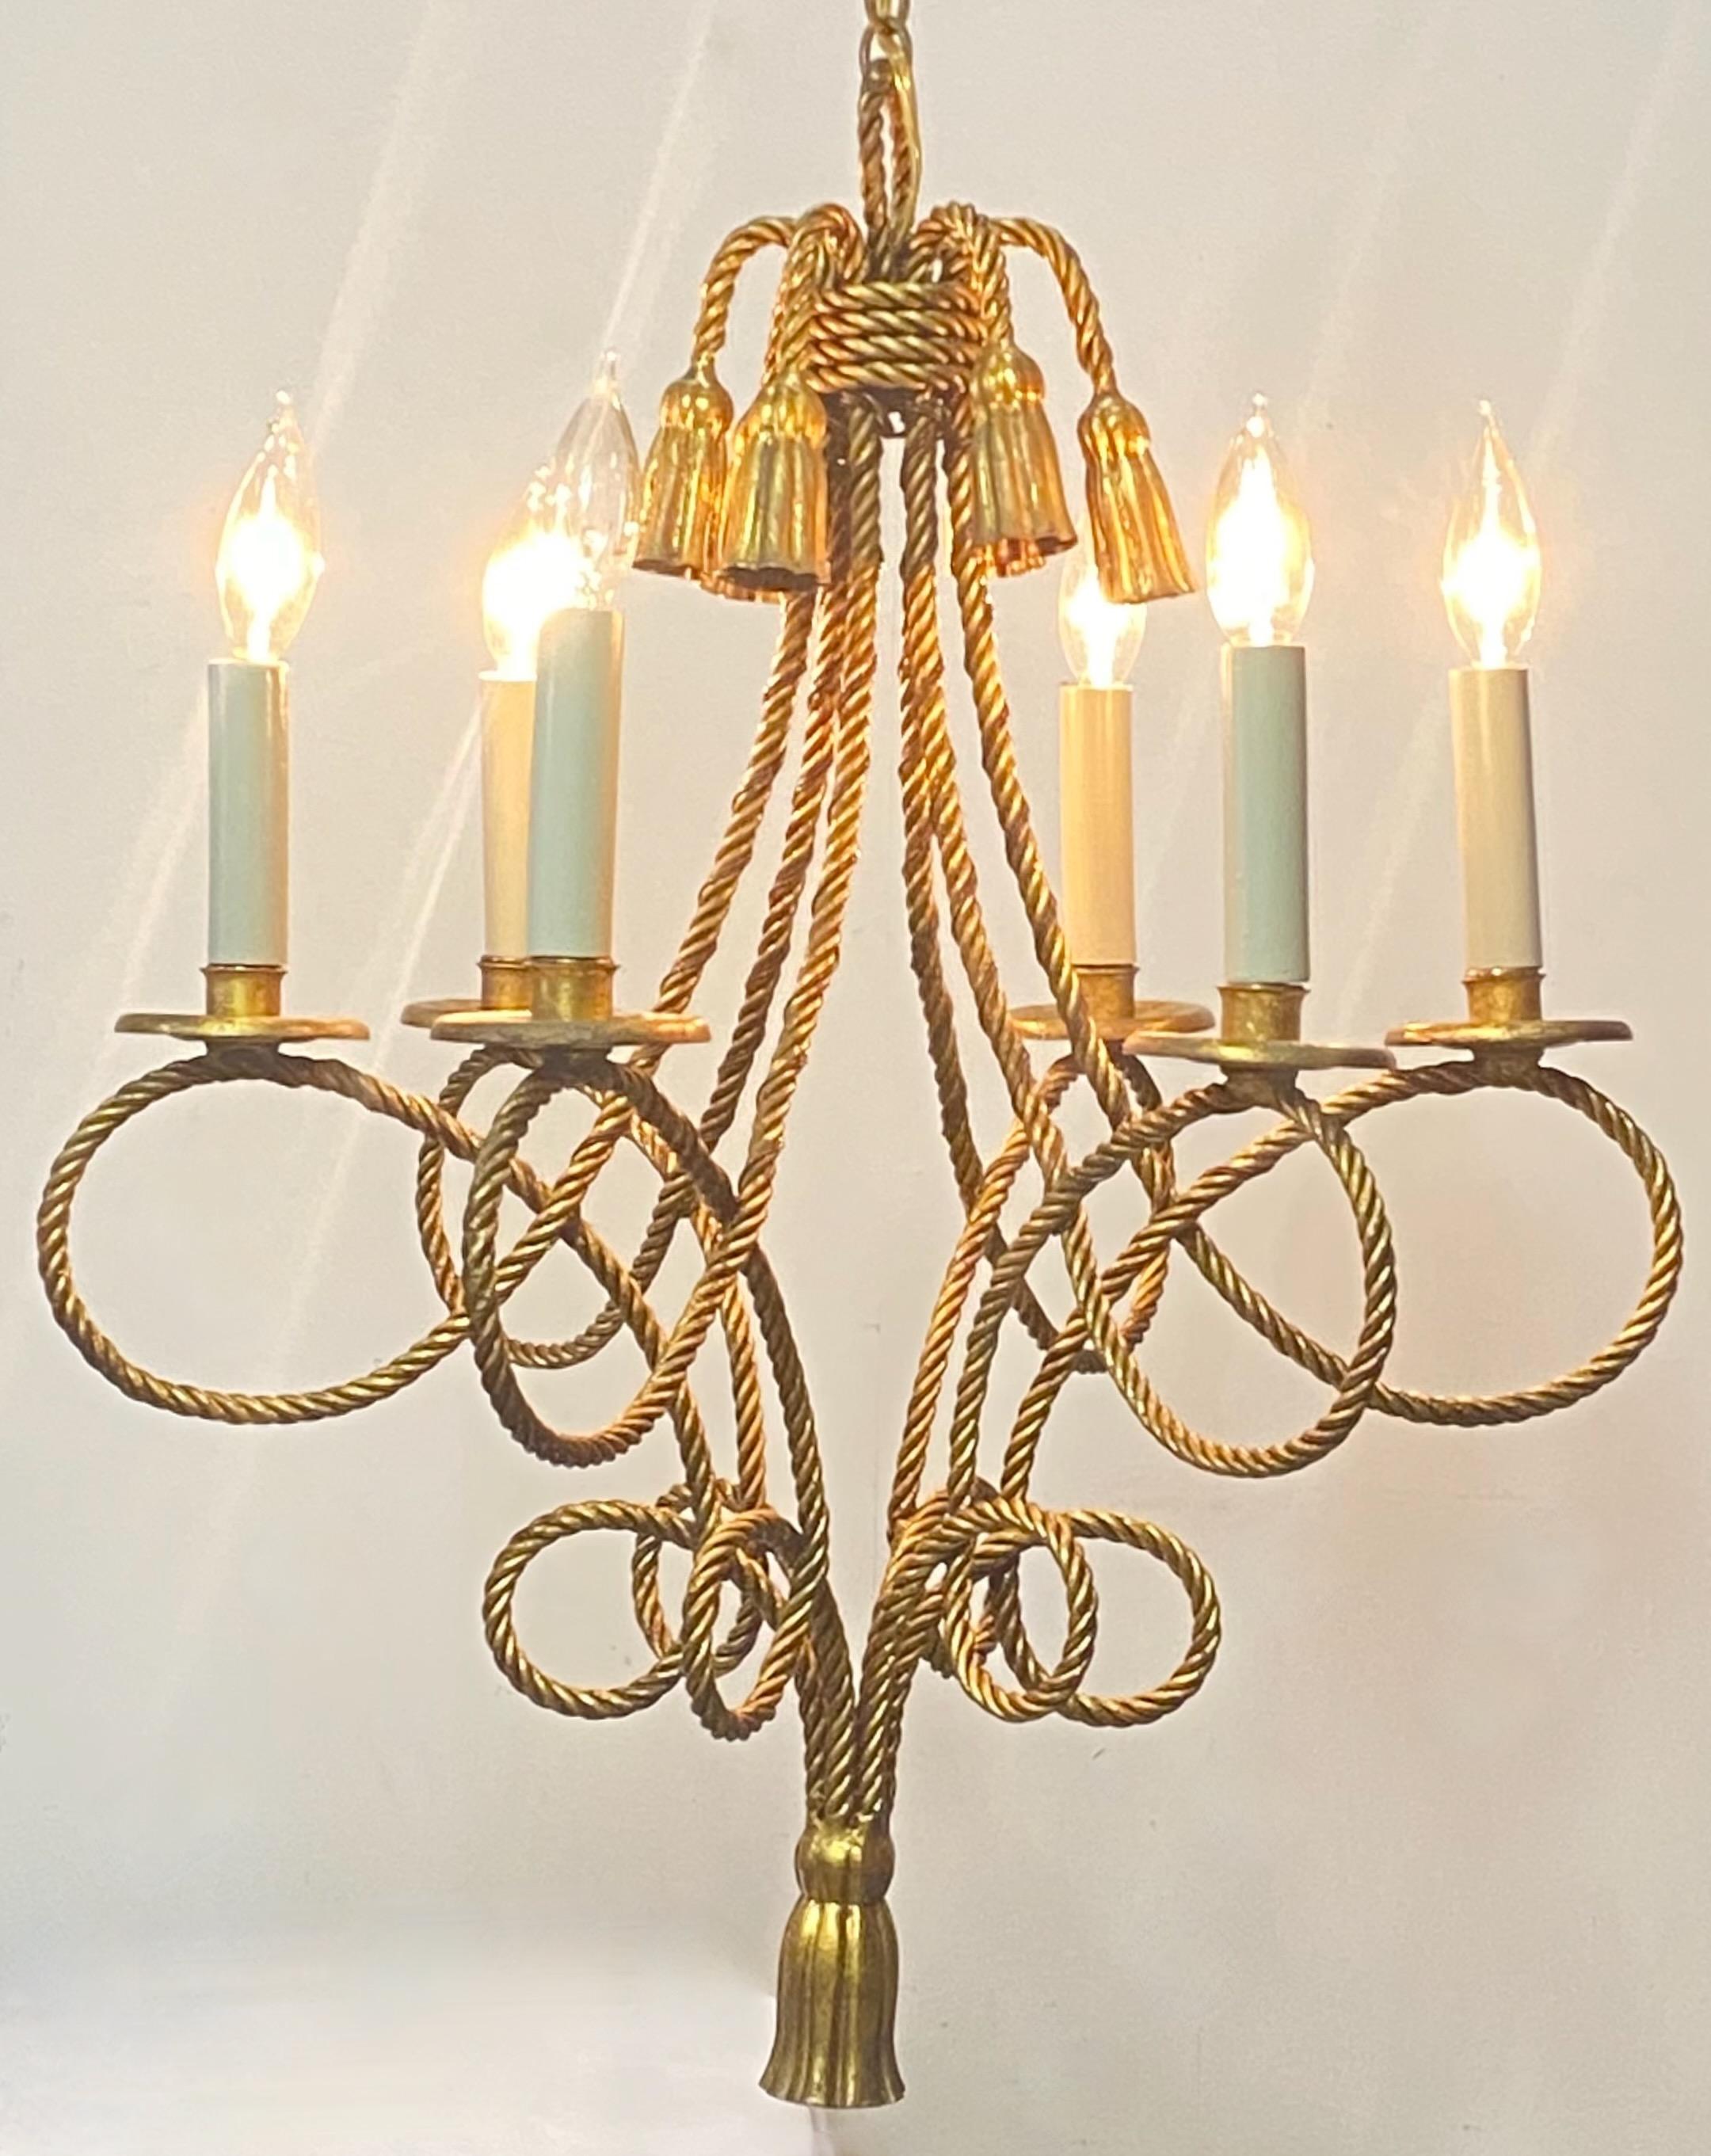 Hollywood Regency style twisted rope and tassel light fixture chandelier.
Gold painted metal frame with six arms. Recently re-wired and ready for installation.
We can adjust the length of the chain to your desired specifications.
In excellent